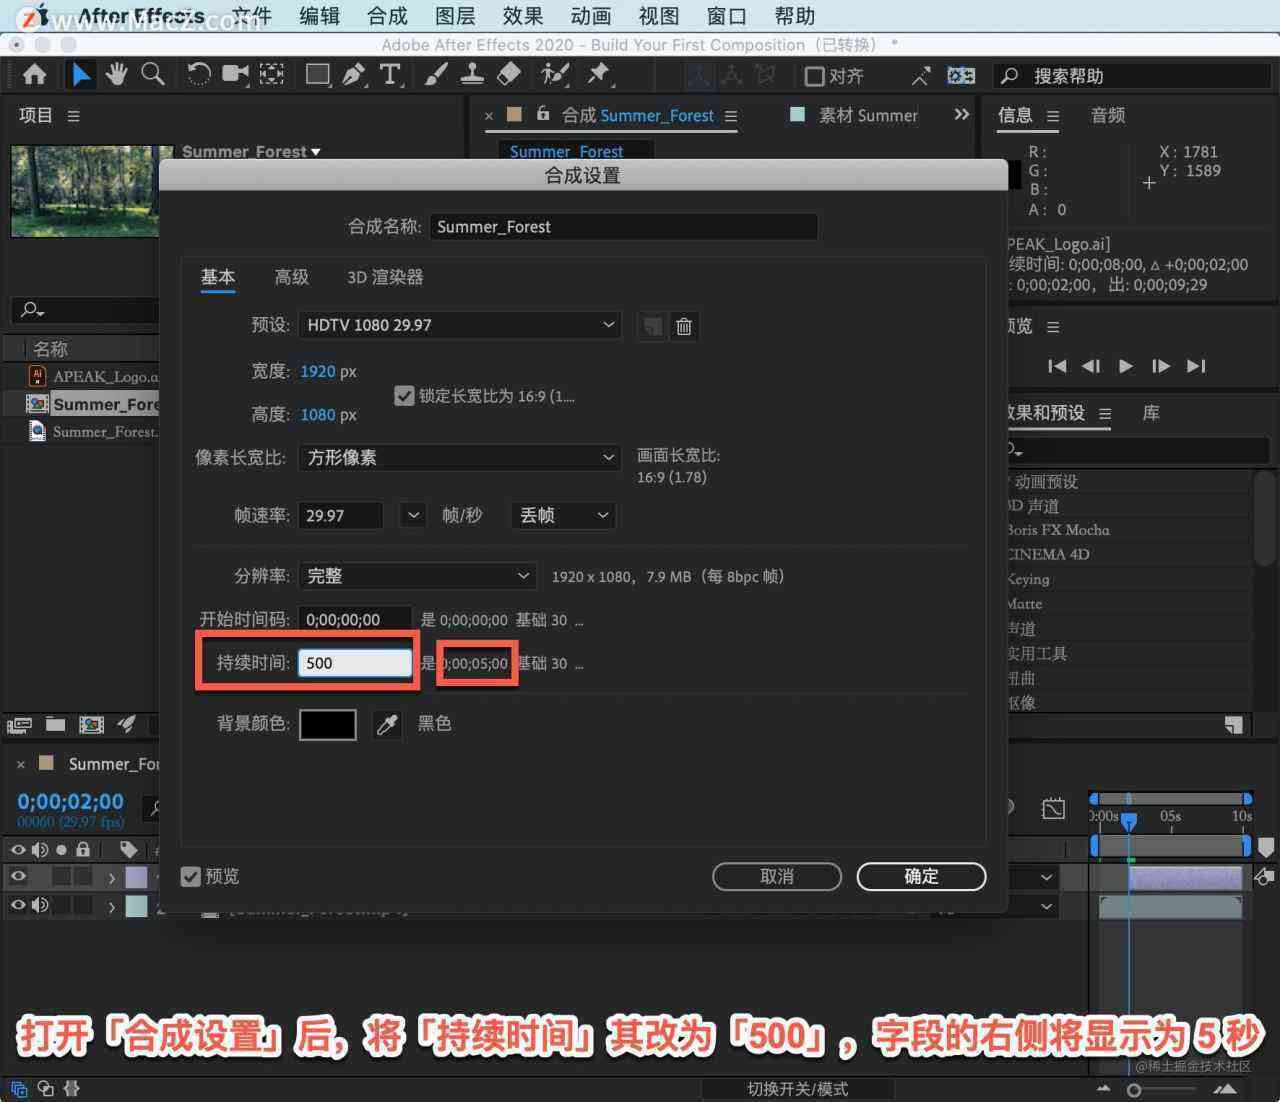 After Effects 教程，如何在 After Effects 中创建合成？